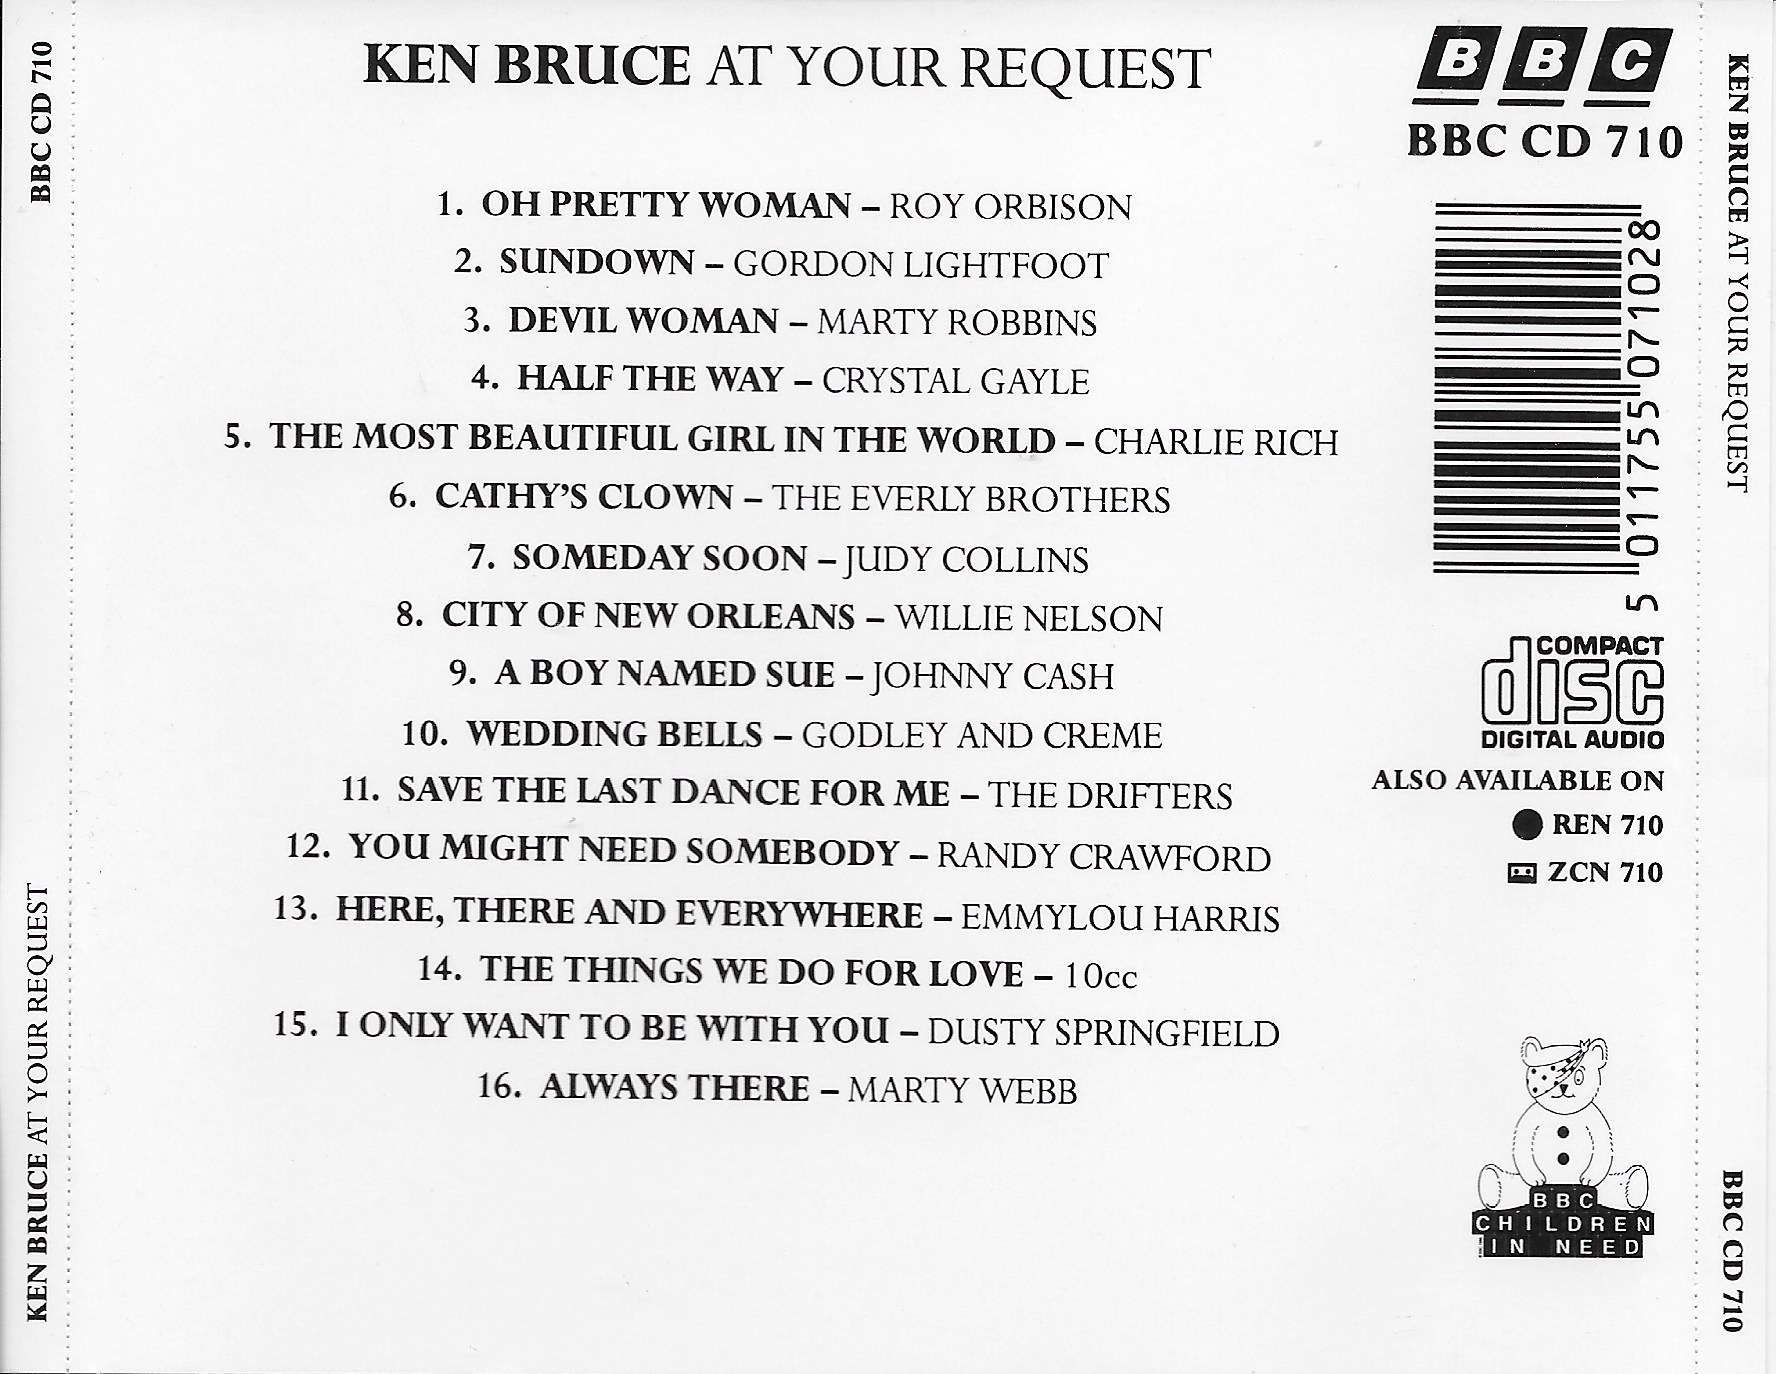 Back cover of BBCCD710